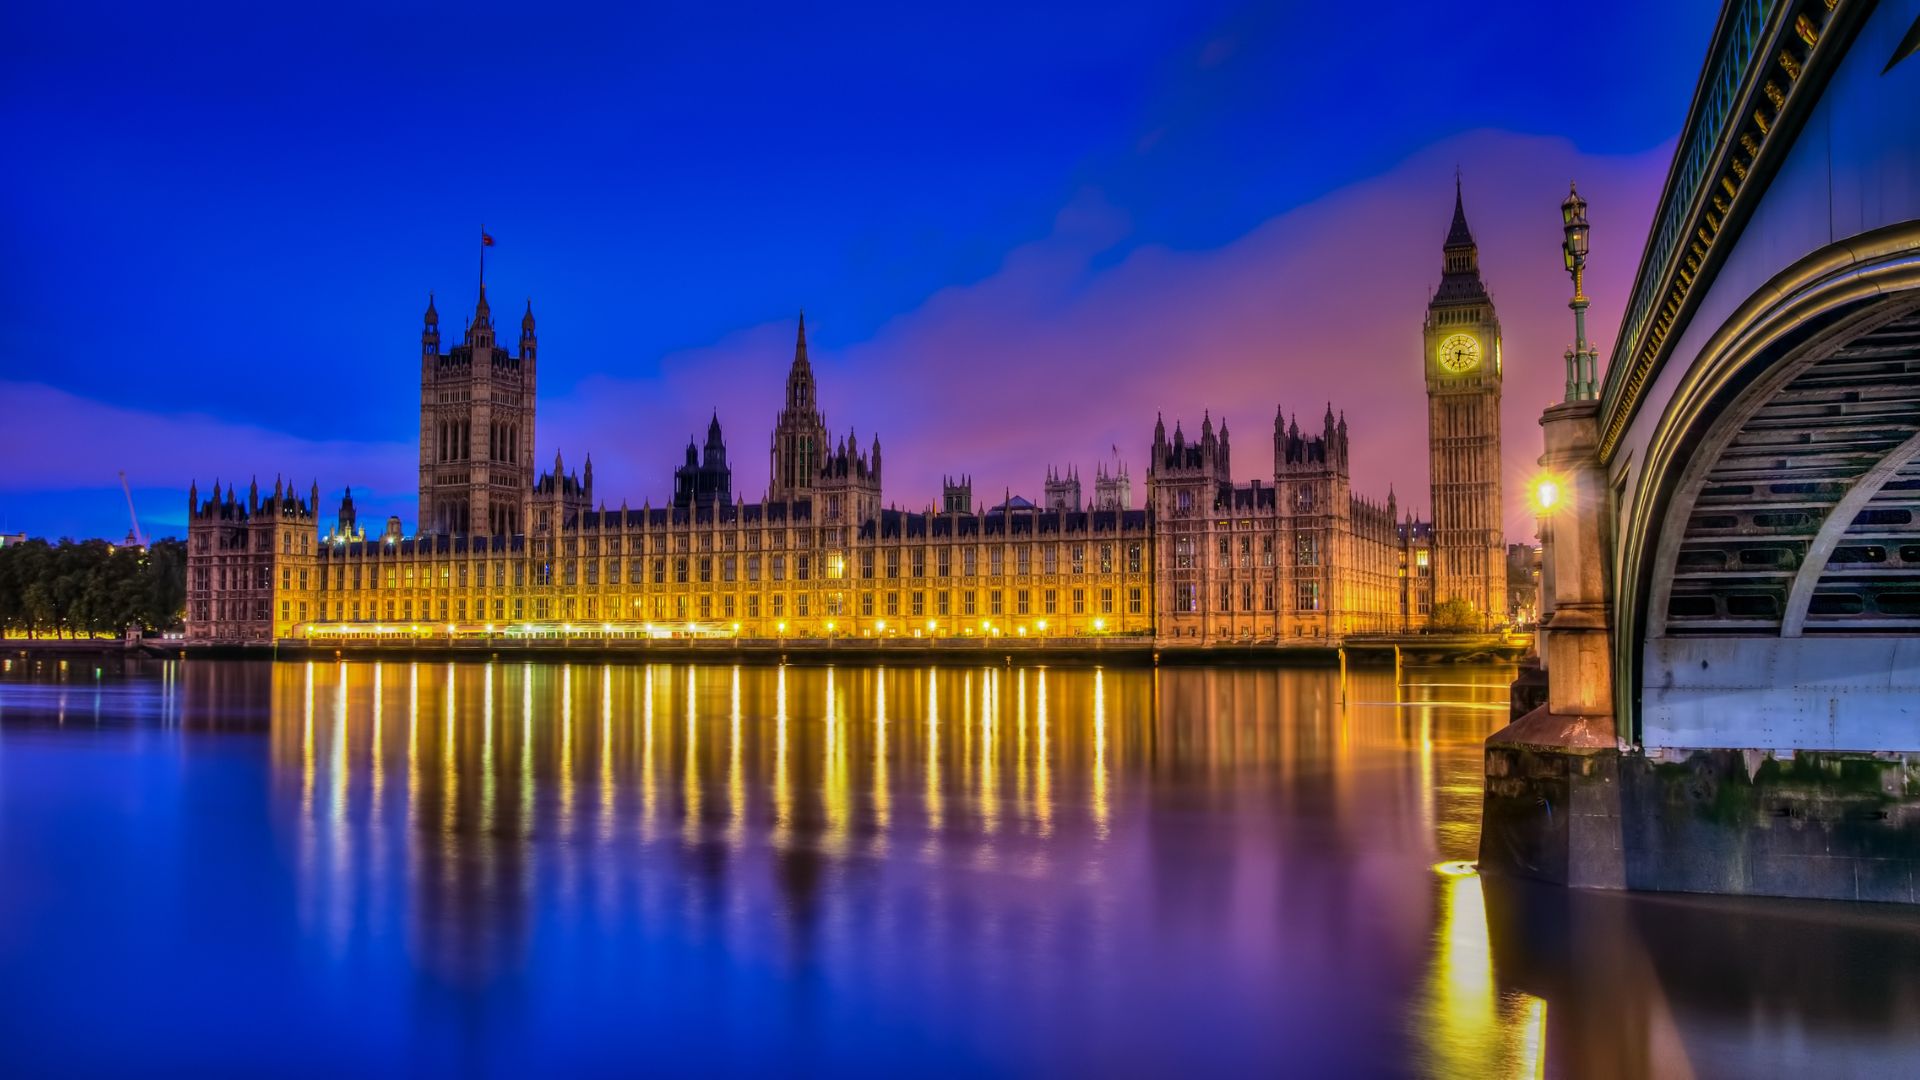 Shot of the Houses of Parliament in London, UK at night, the sky is purple and dark blue, as is the River Thames in the foreground of the shot.